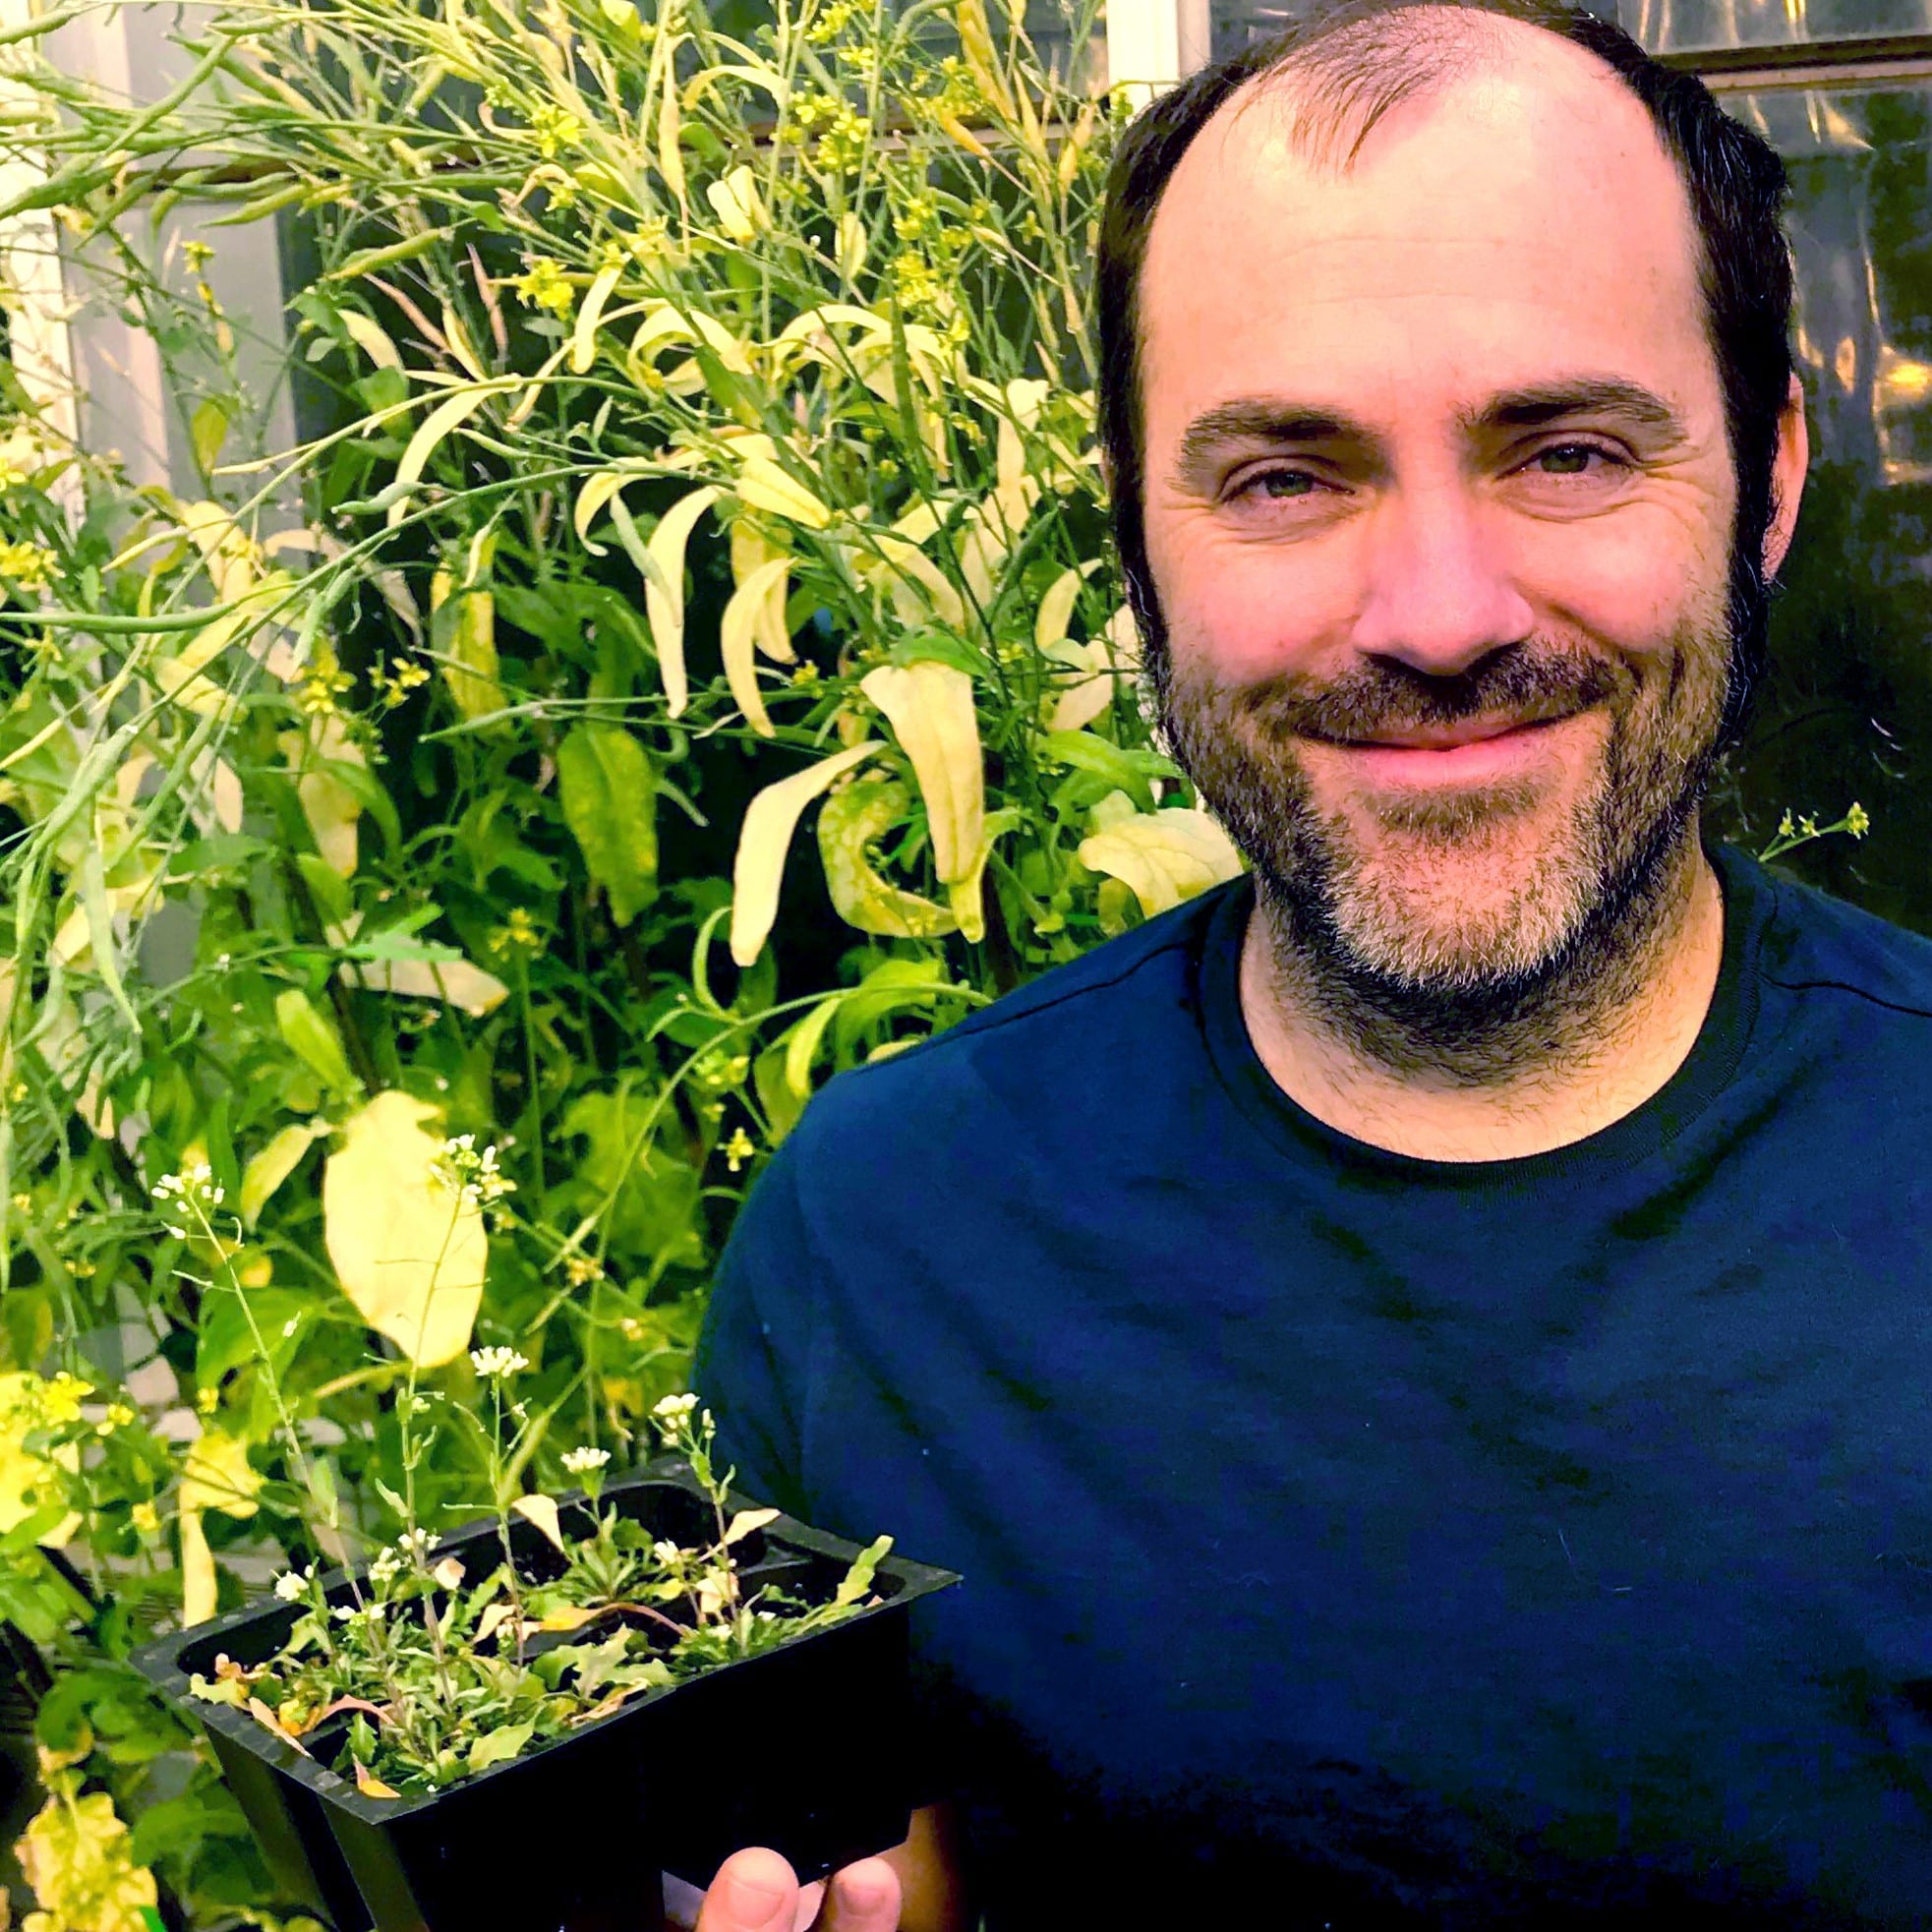 Medium closeup photo of Andrew Nelson smiling and holding a four-pack of small plants, Eutrema salsugineum. He is sitting on table in a greenhouse. Behind him are larger specimens of Eutrema salsugineum, which reach slightly above his head.